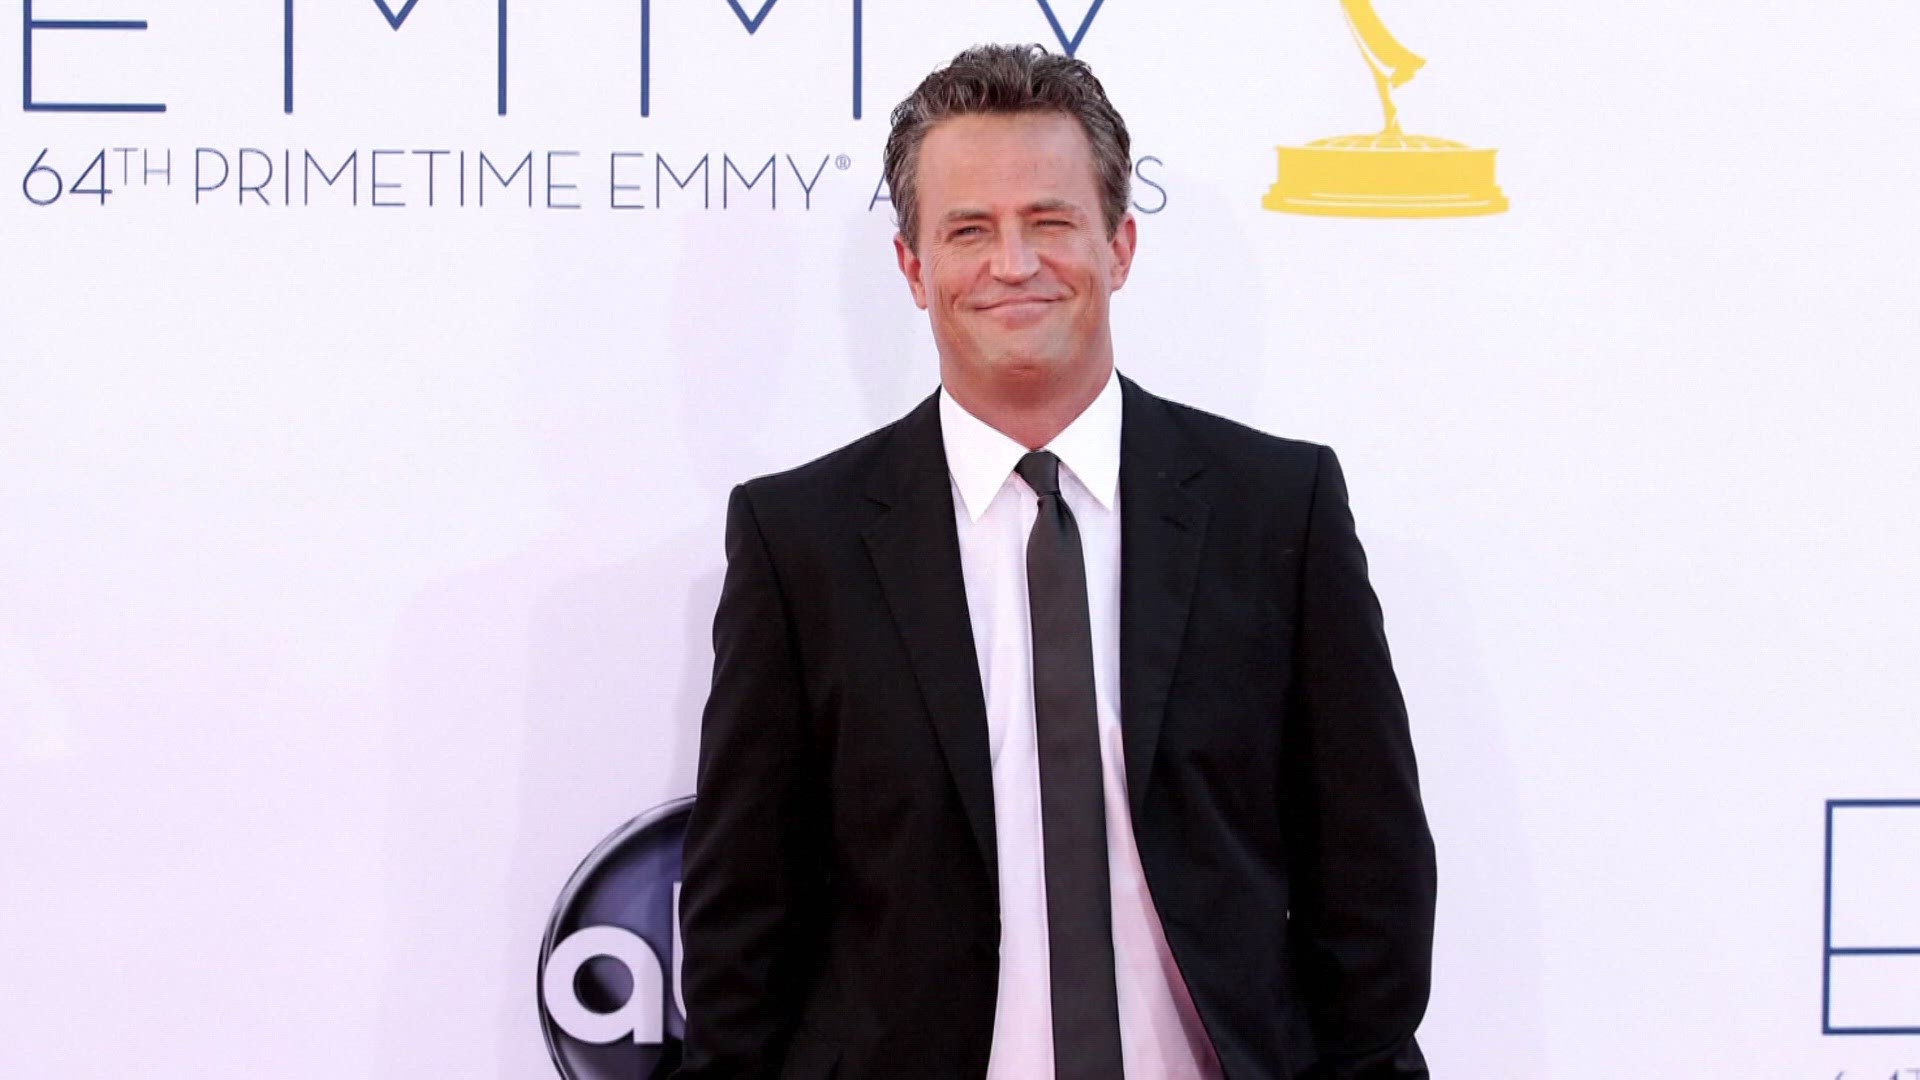 Matthew Perry cause of death deferred: Medical examiner | 9news.com